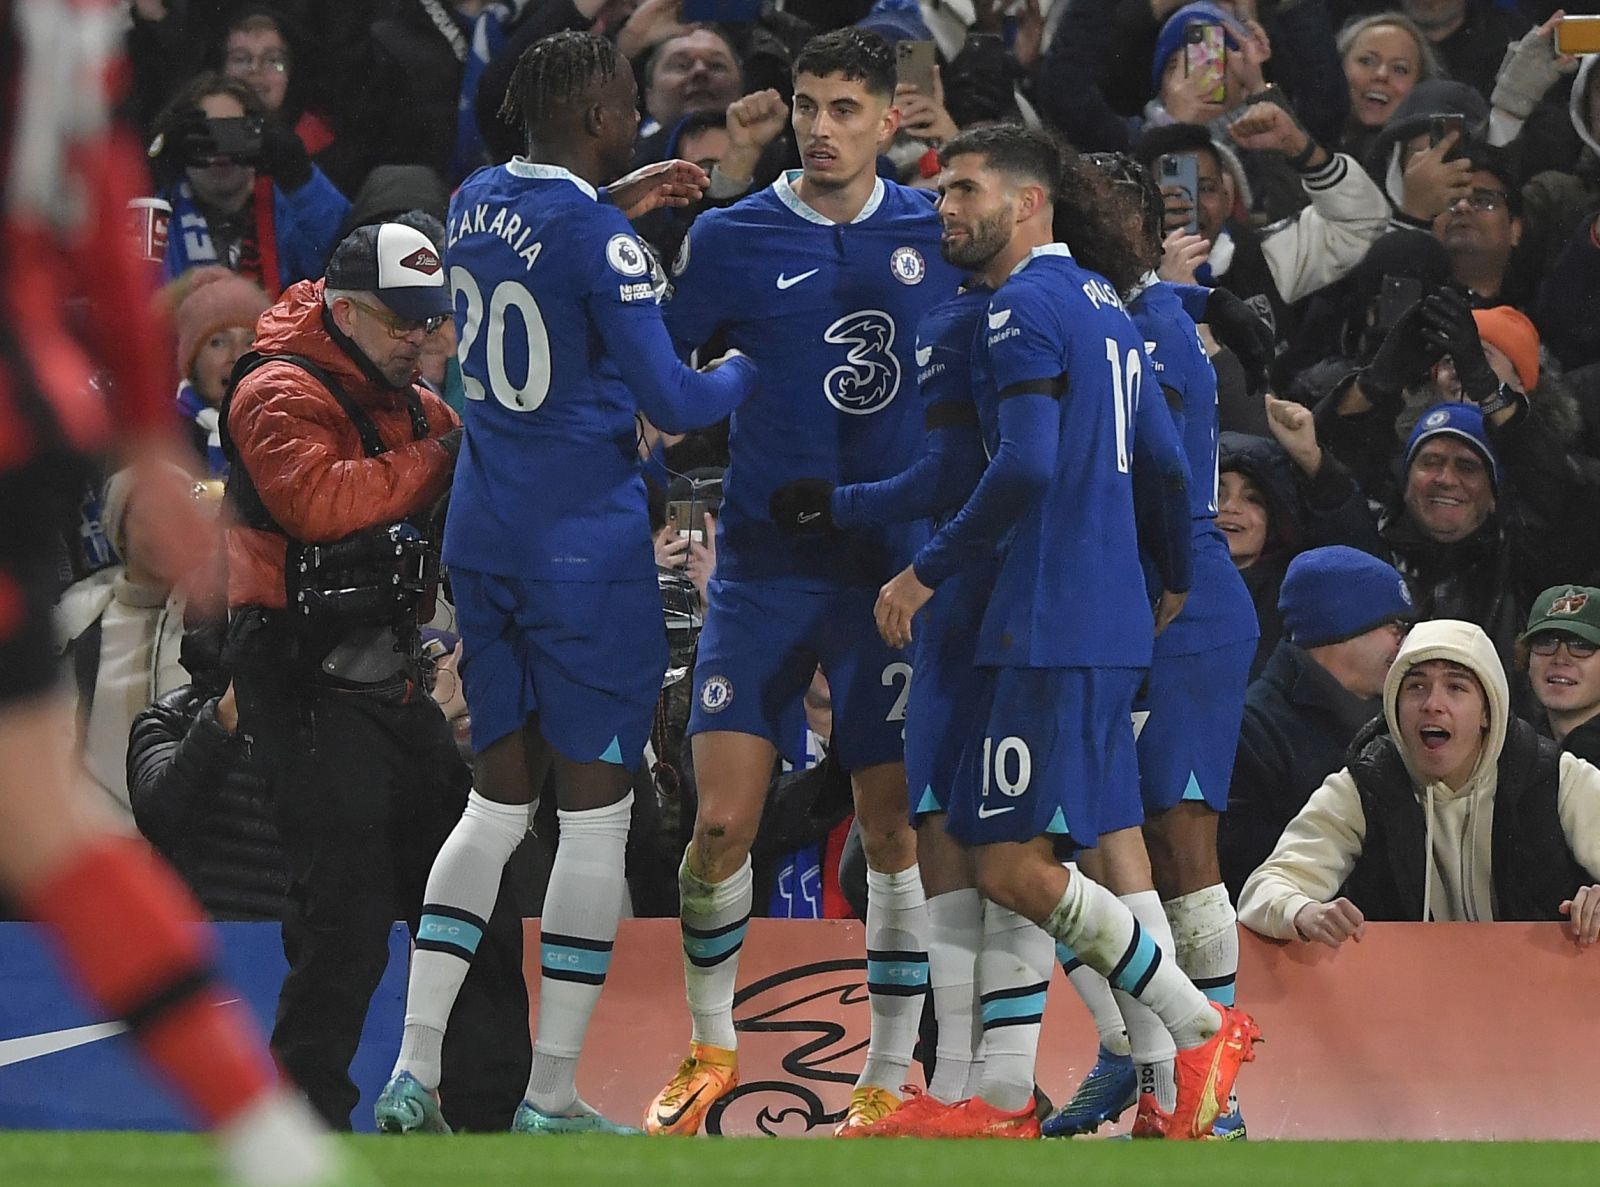 epa10379378 Kai Havertz (C) of Chelsea celebrates with team mates after scoring the 1-0 lead during the English Premier League soccer match between Chelsea FC and AFC Bournemouth in London, Britain, 27 December 2022.  EPA/Vince Mignott EDITORIAL USE ONLY. No use with unauthorized audio, video, data, fixture lists, club/league logos or 'live' services. Online in-match use limited to 120 images, no video emulation. No use in betting, games or single club/league/player publications